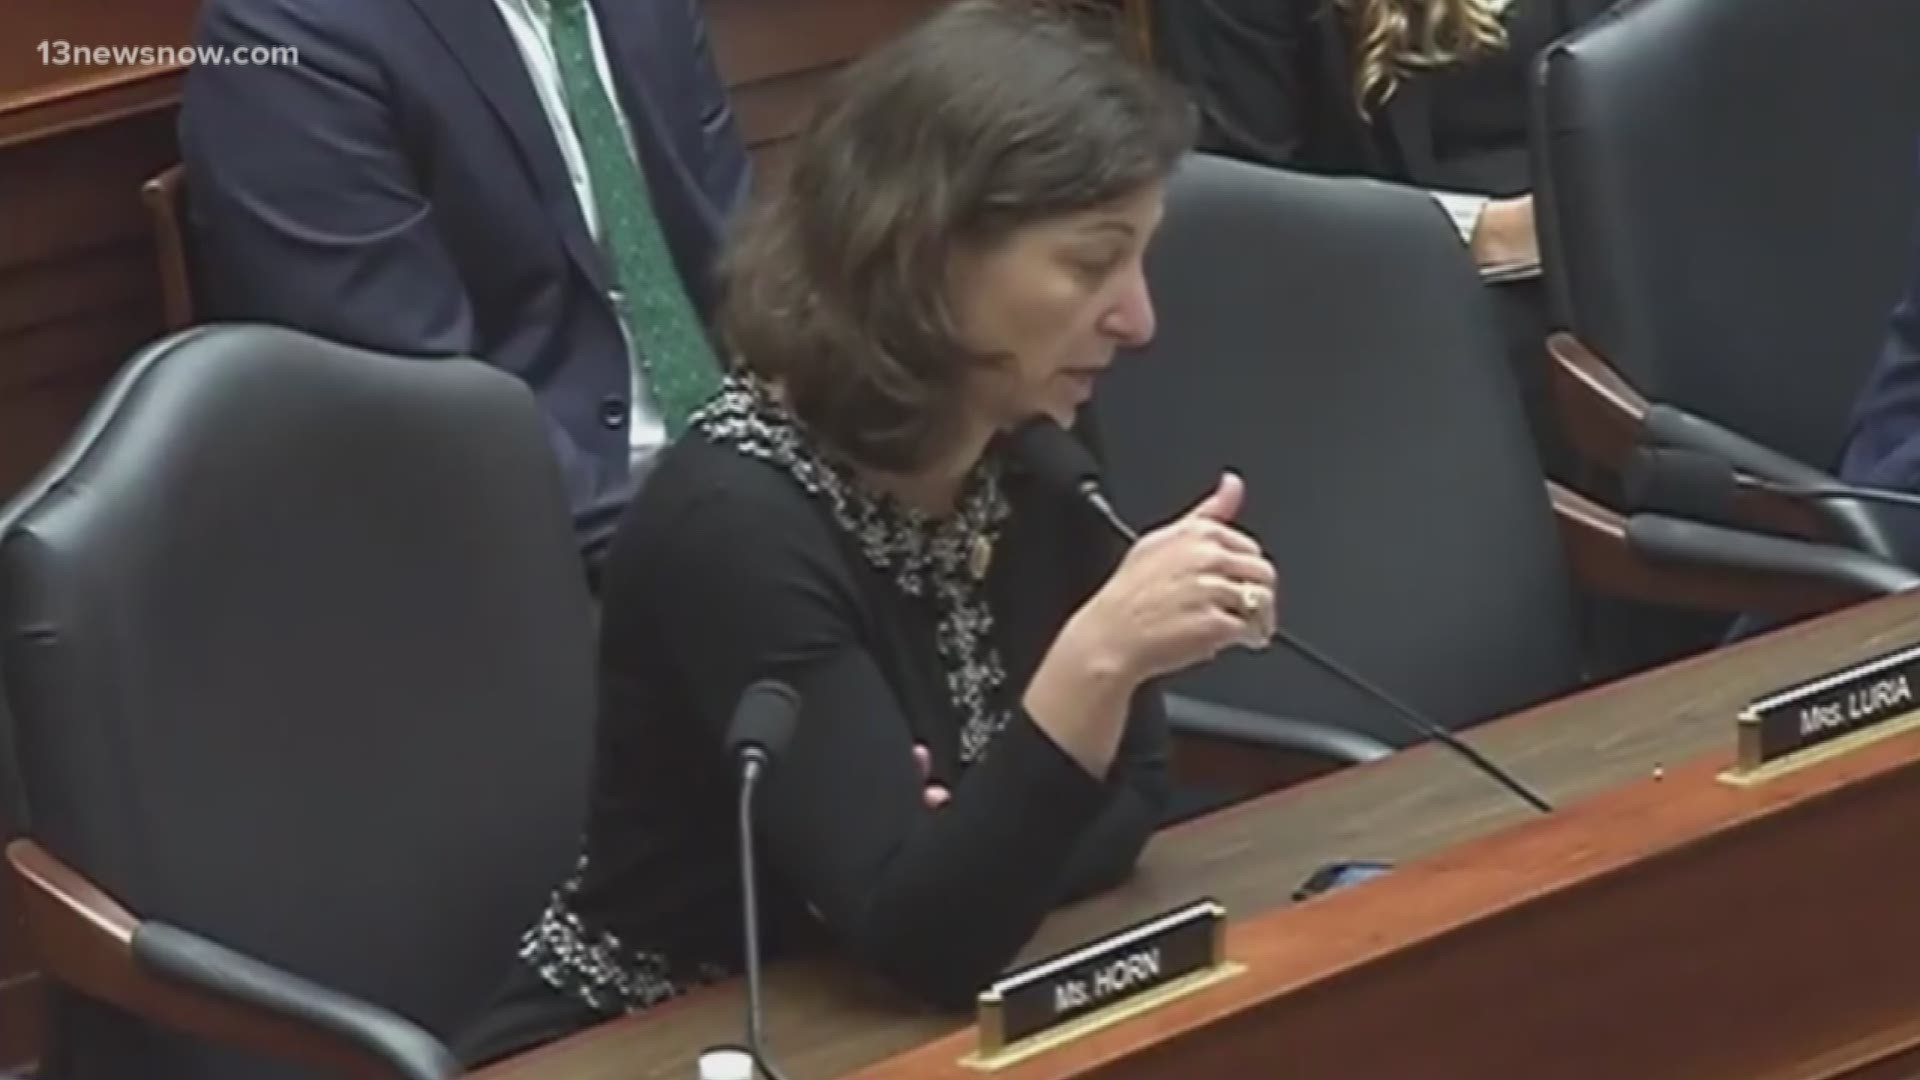 Due to weapons elevators issues on the USS Ford, the USS Lincoln has to stay out at sea longer. Congresswoman Elaine Luria raised concerns about the issues.